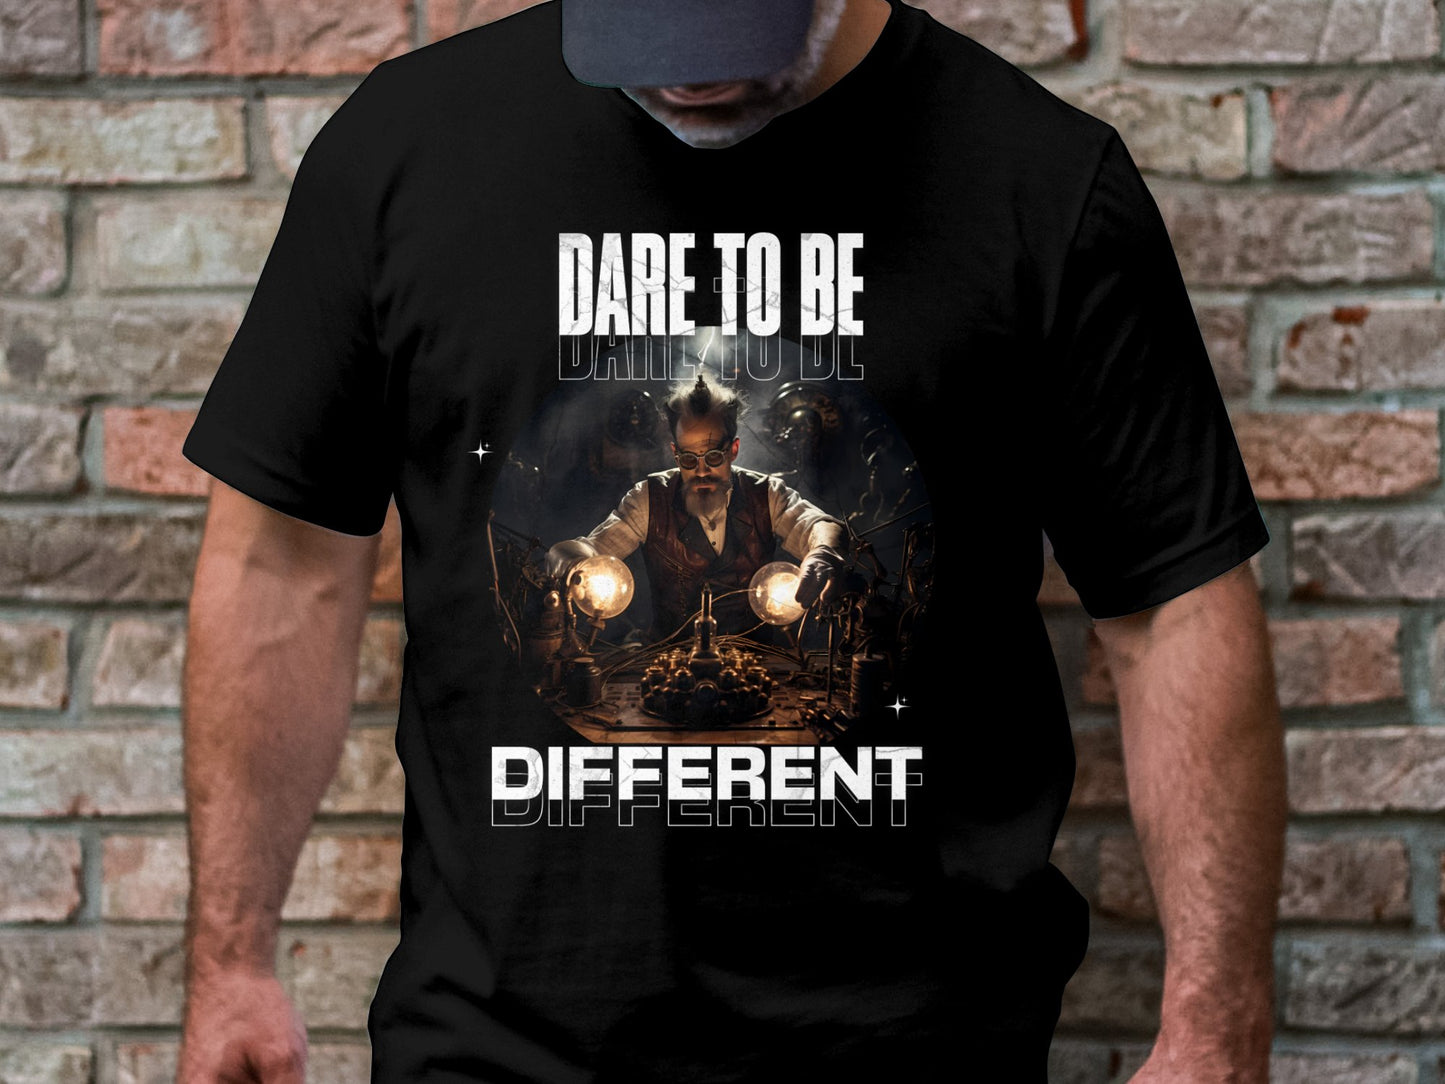 Dare To Be Different T-Shirt, Inspirational Quote, Steampunk Style, Unique Gift Idea, Unisex Graphic Tee